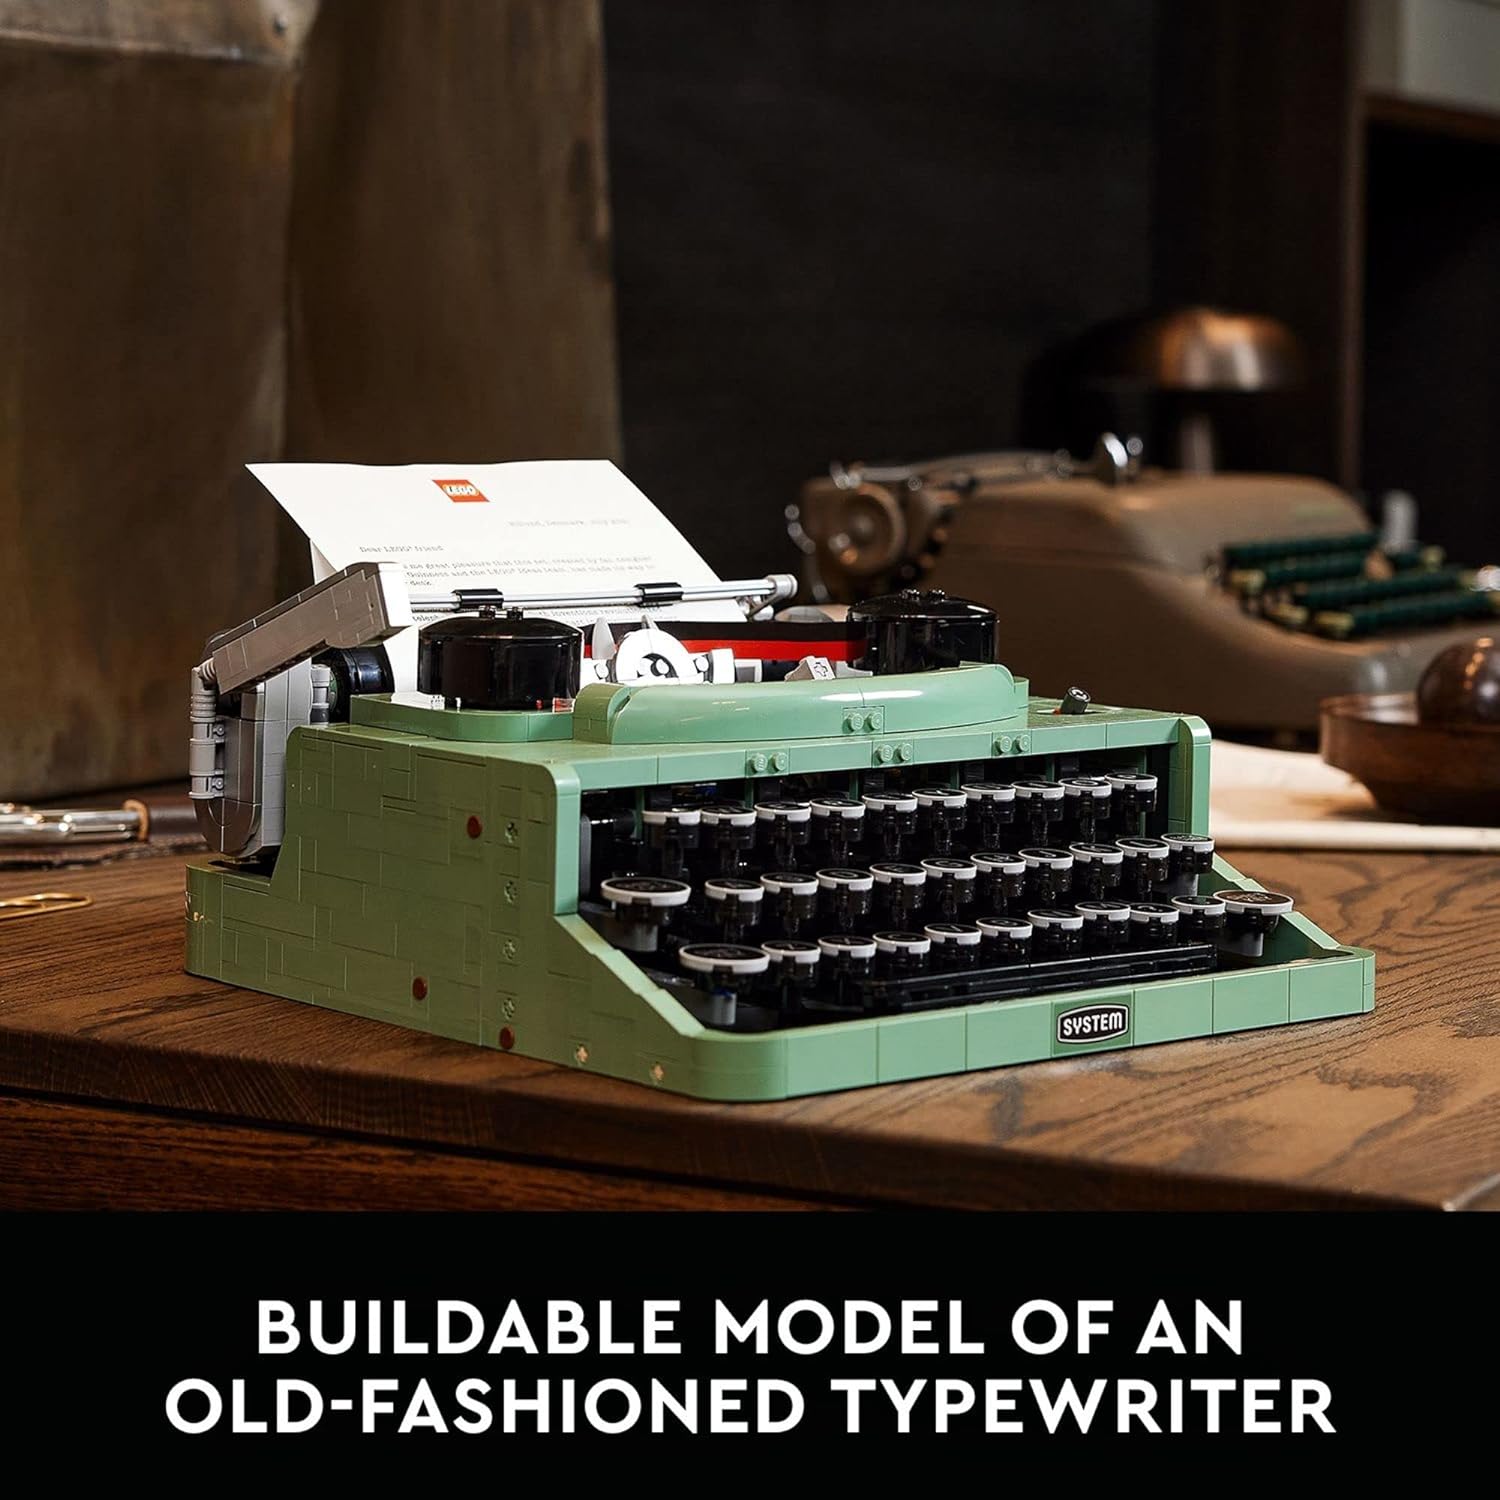 LEGO Ideas Typewriter 21327 Building Set for Adults, Collectible Retro Display Model, Creative Hobbies Unique Gift Idea